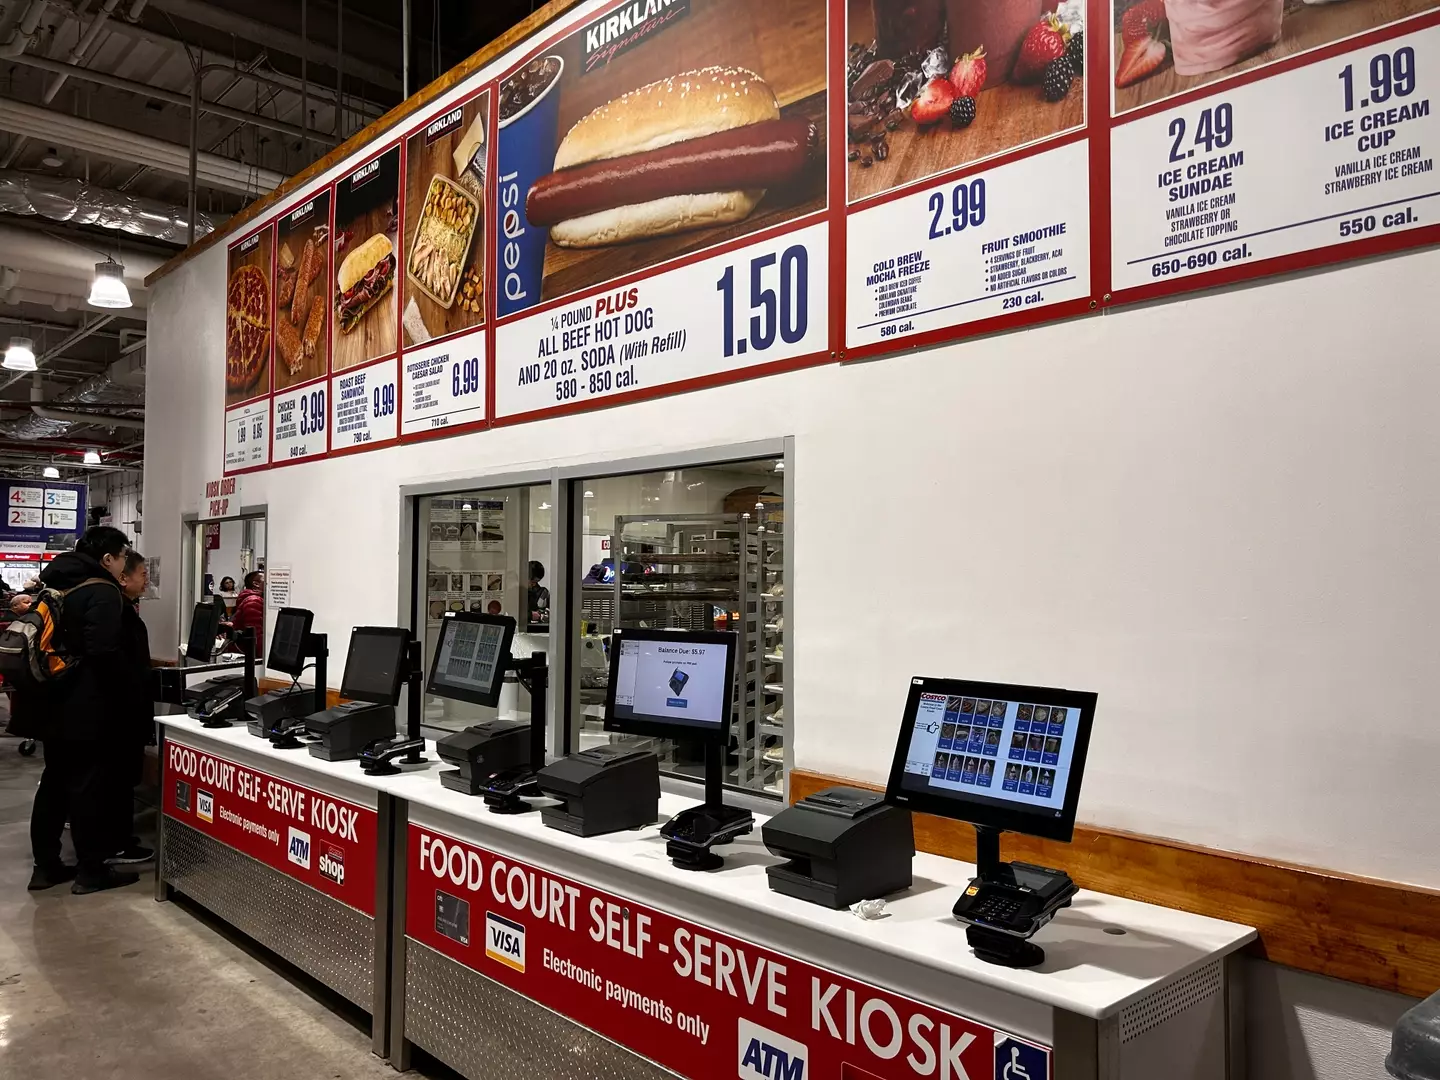 Less people will be able to purchase Costco's famous $1.50 hot dogs (Lindsey Nicholson/UCG/Universal Images Group via Getty Images)